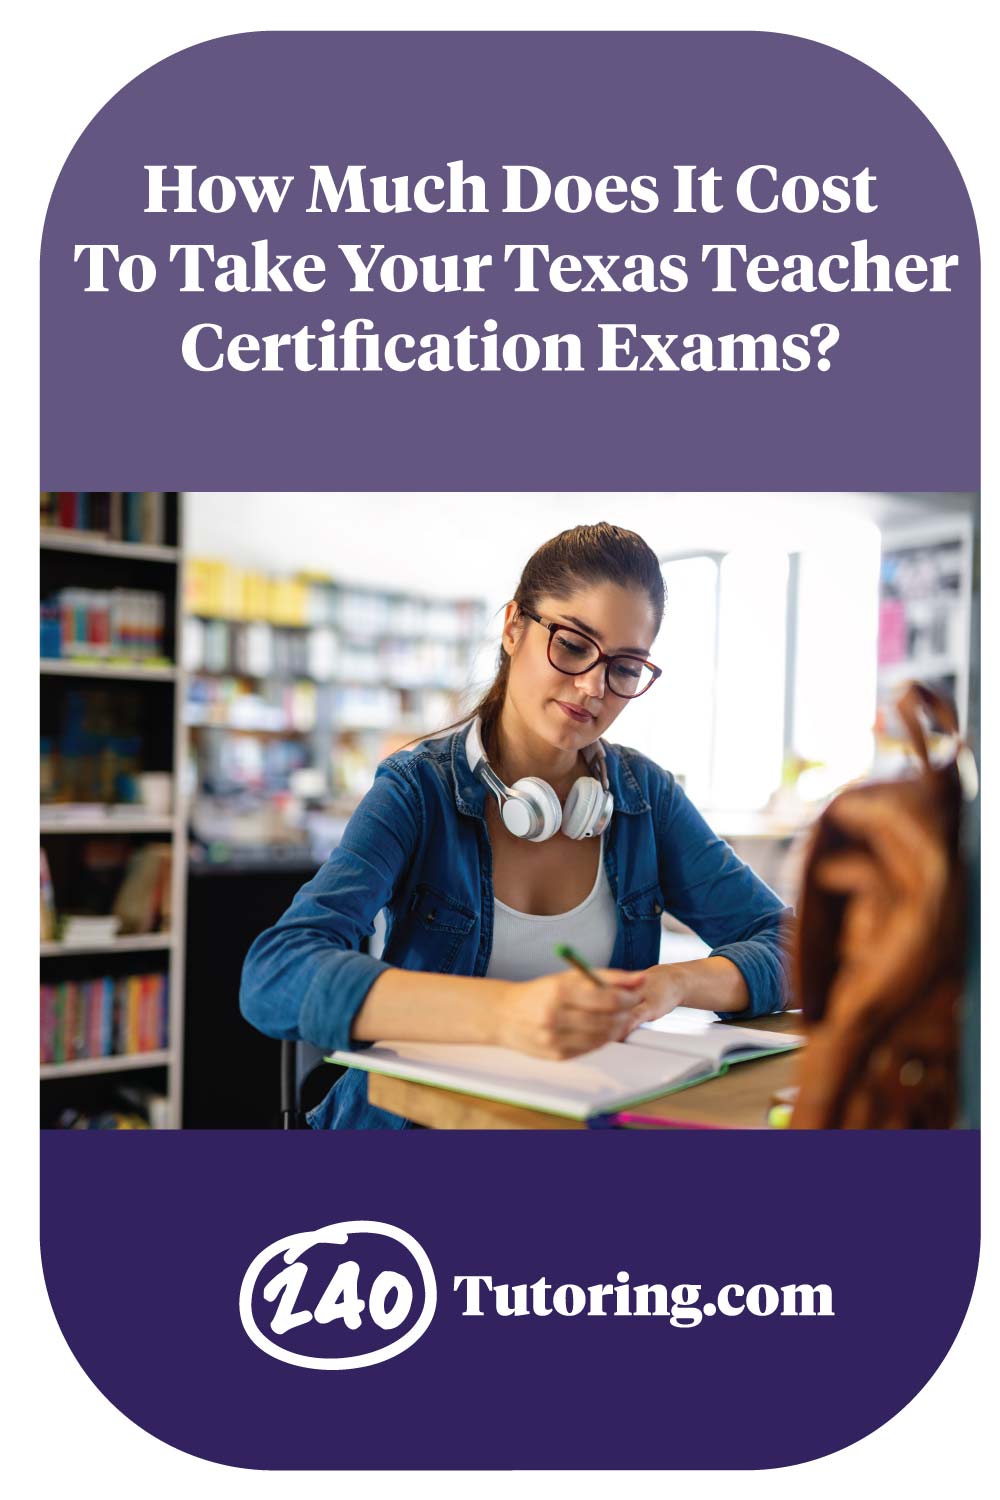 How Much Does It Cost To Take Your Texas Teacher Certification Exam